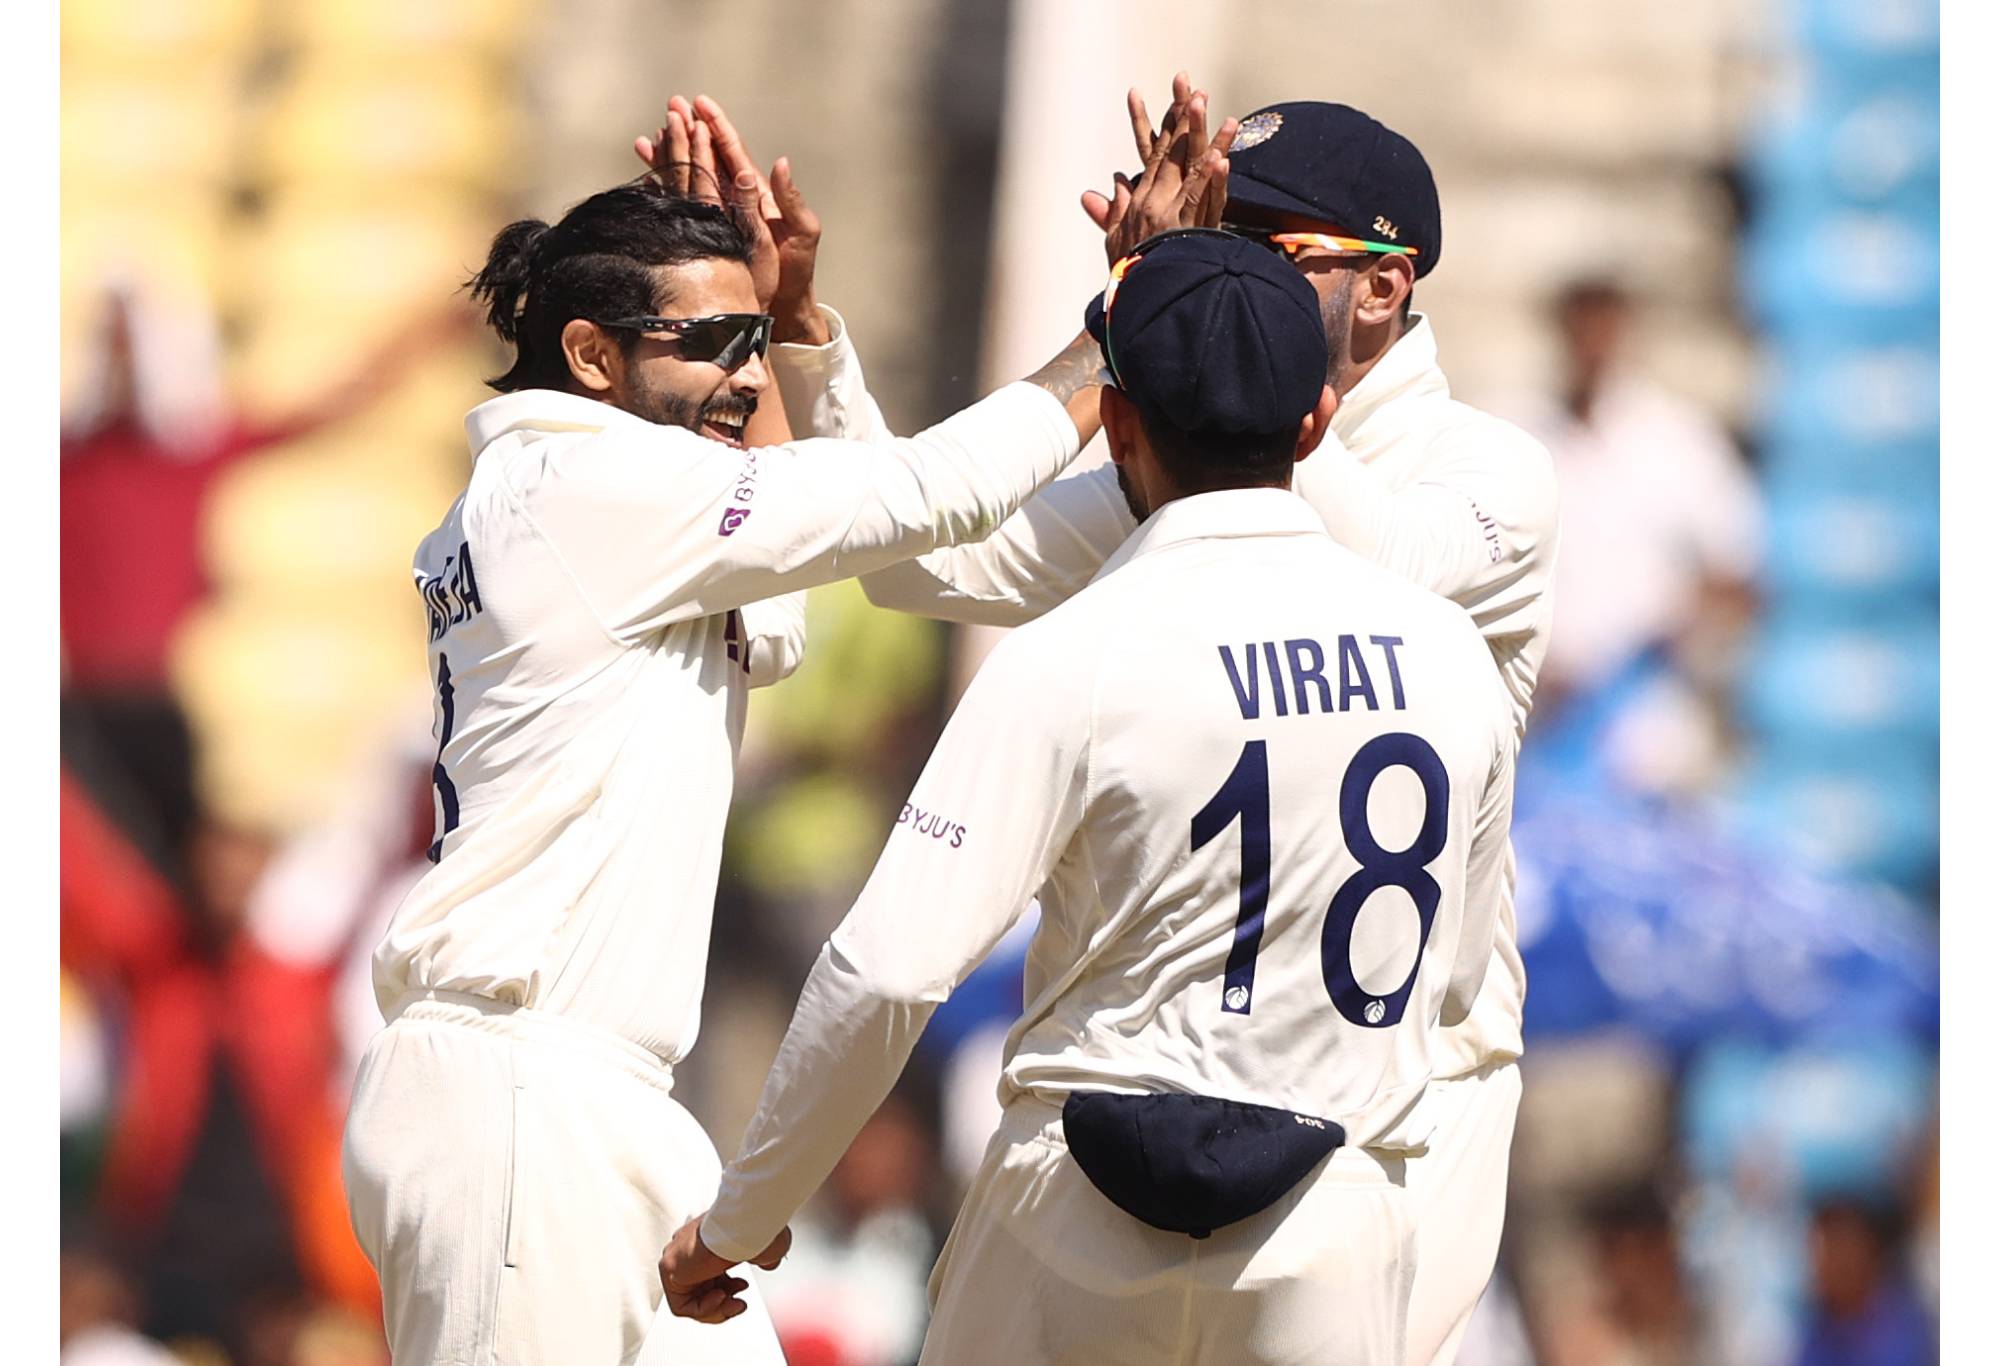 NAGPUR, INDIA - FEBRUARY 09: Ravindra Jadeja of India celebrates taking the wicket of Marnus Labuschagne of Australia during day one of the First Test match in the series between India and Australia at Vidarbha Cricket Association Ground on February 09, 2023 in Nagpur, India. (Photo by Robert Cianflone/Getty Images)